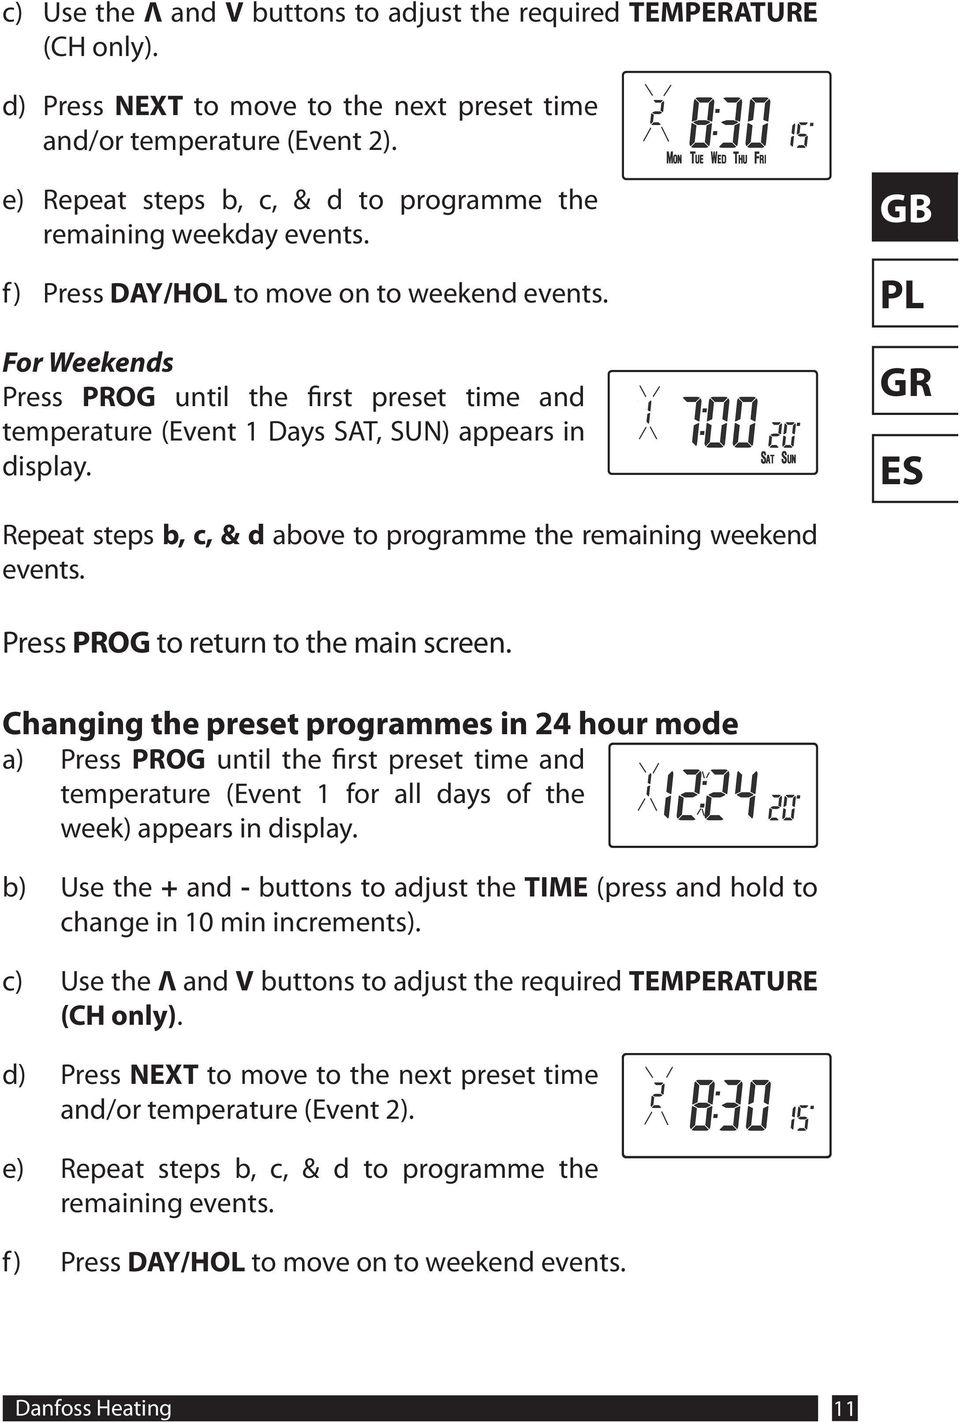 For Weekends Press PROG until the first preset time and temperature (Event 1 Days SAT, SUN) appears in display. Repeat steps b, c, & d above to programme the remaining weekend events.